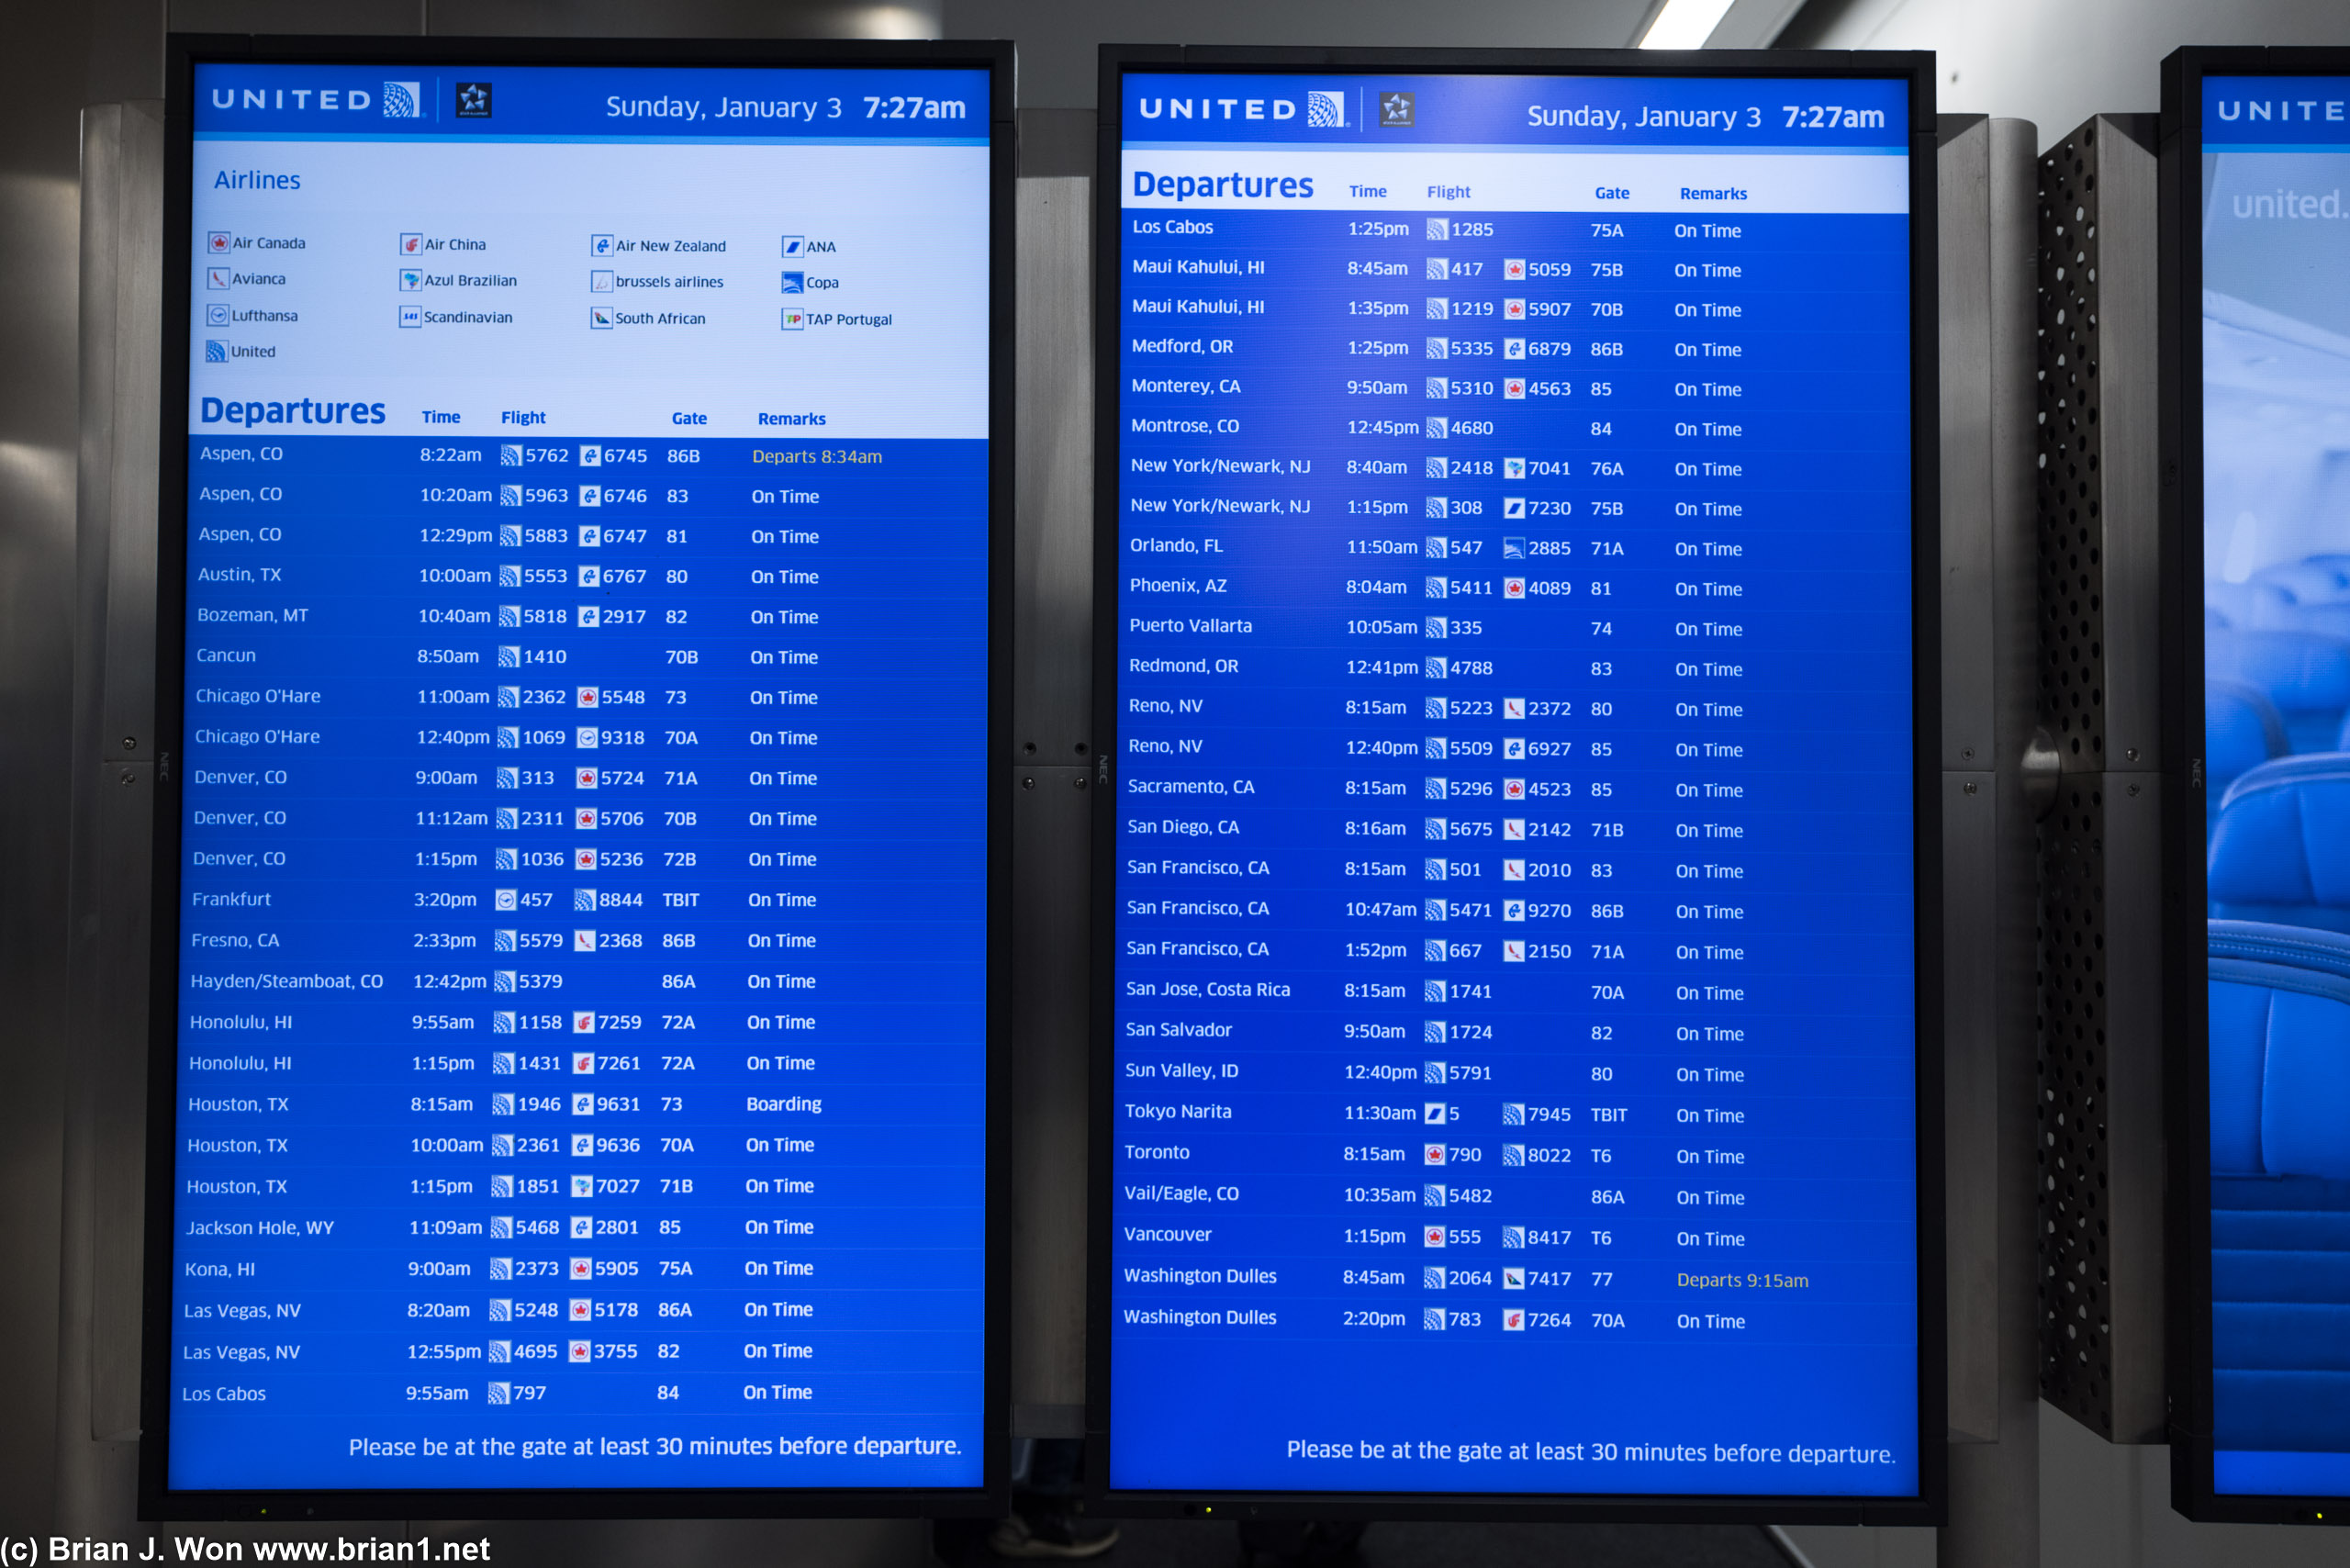 Terminal 7 flight board on arrival at LAX. Note lack of TPAC and TATL flights.